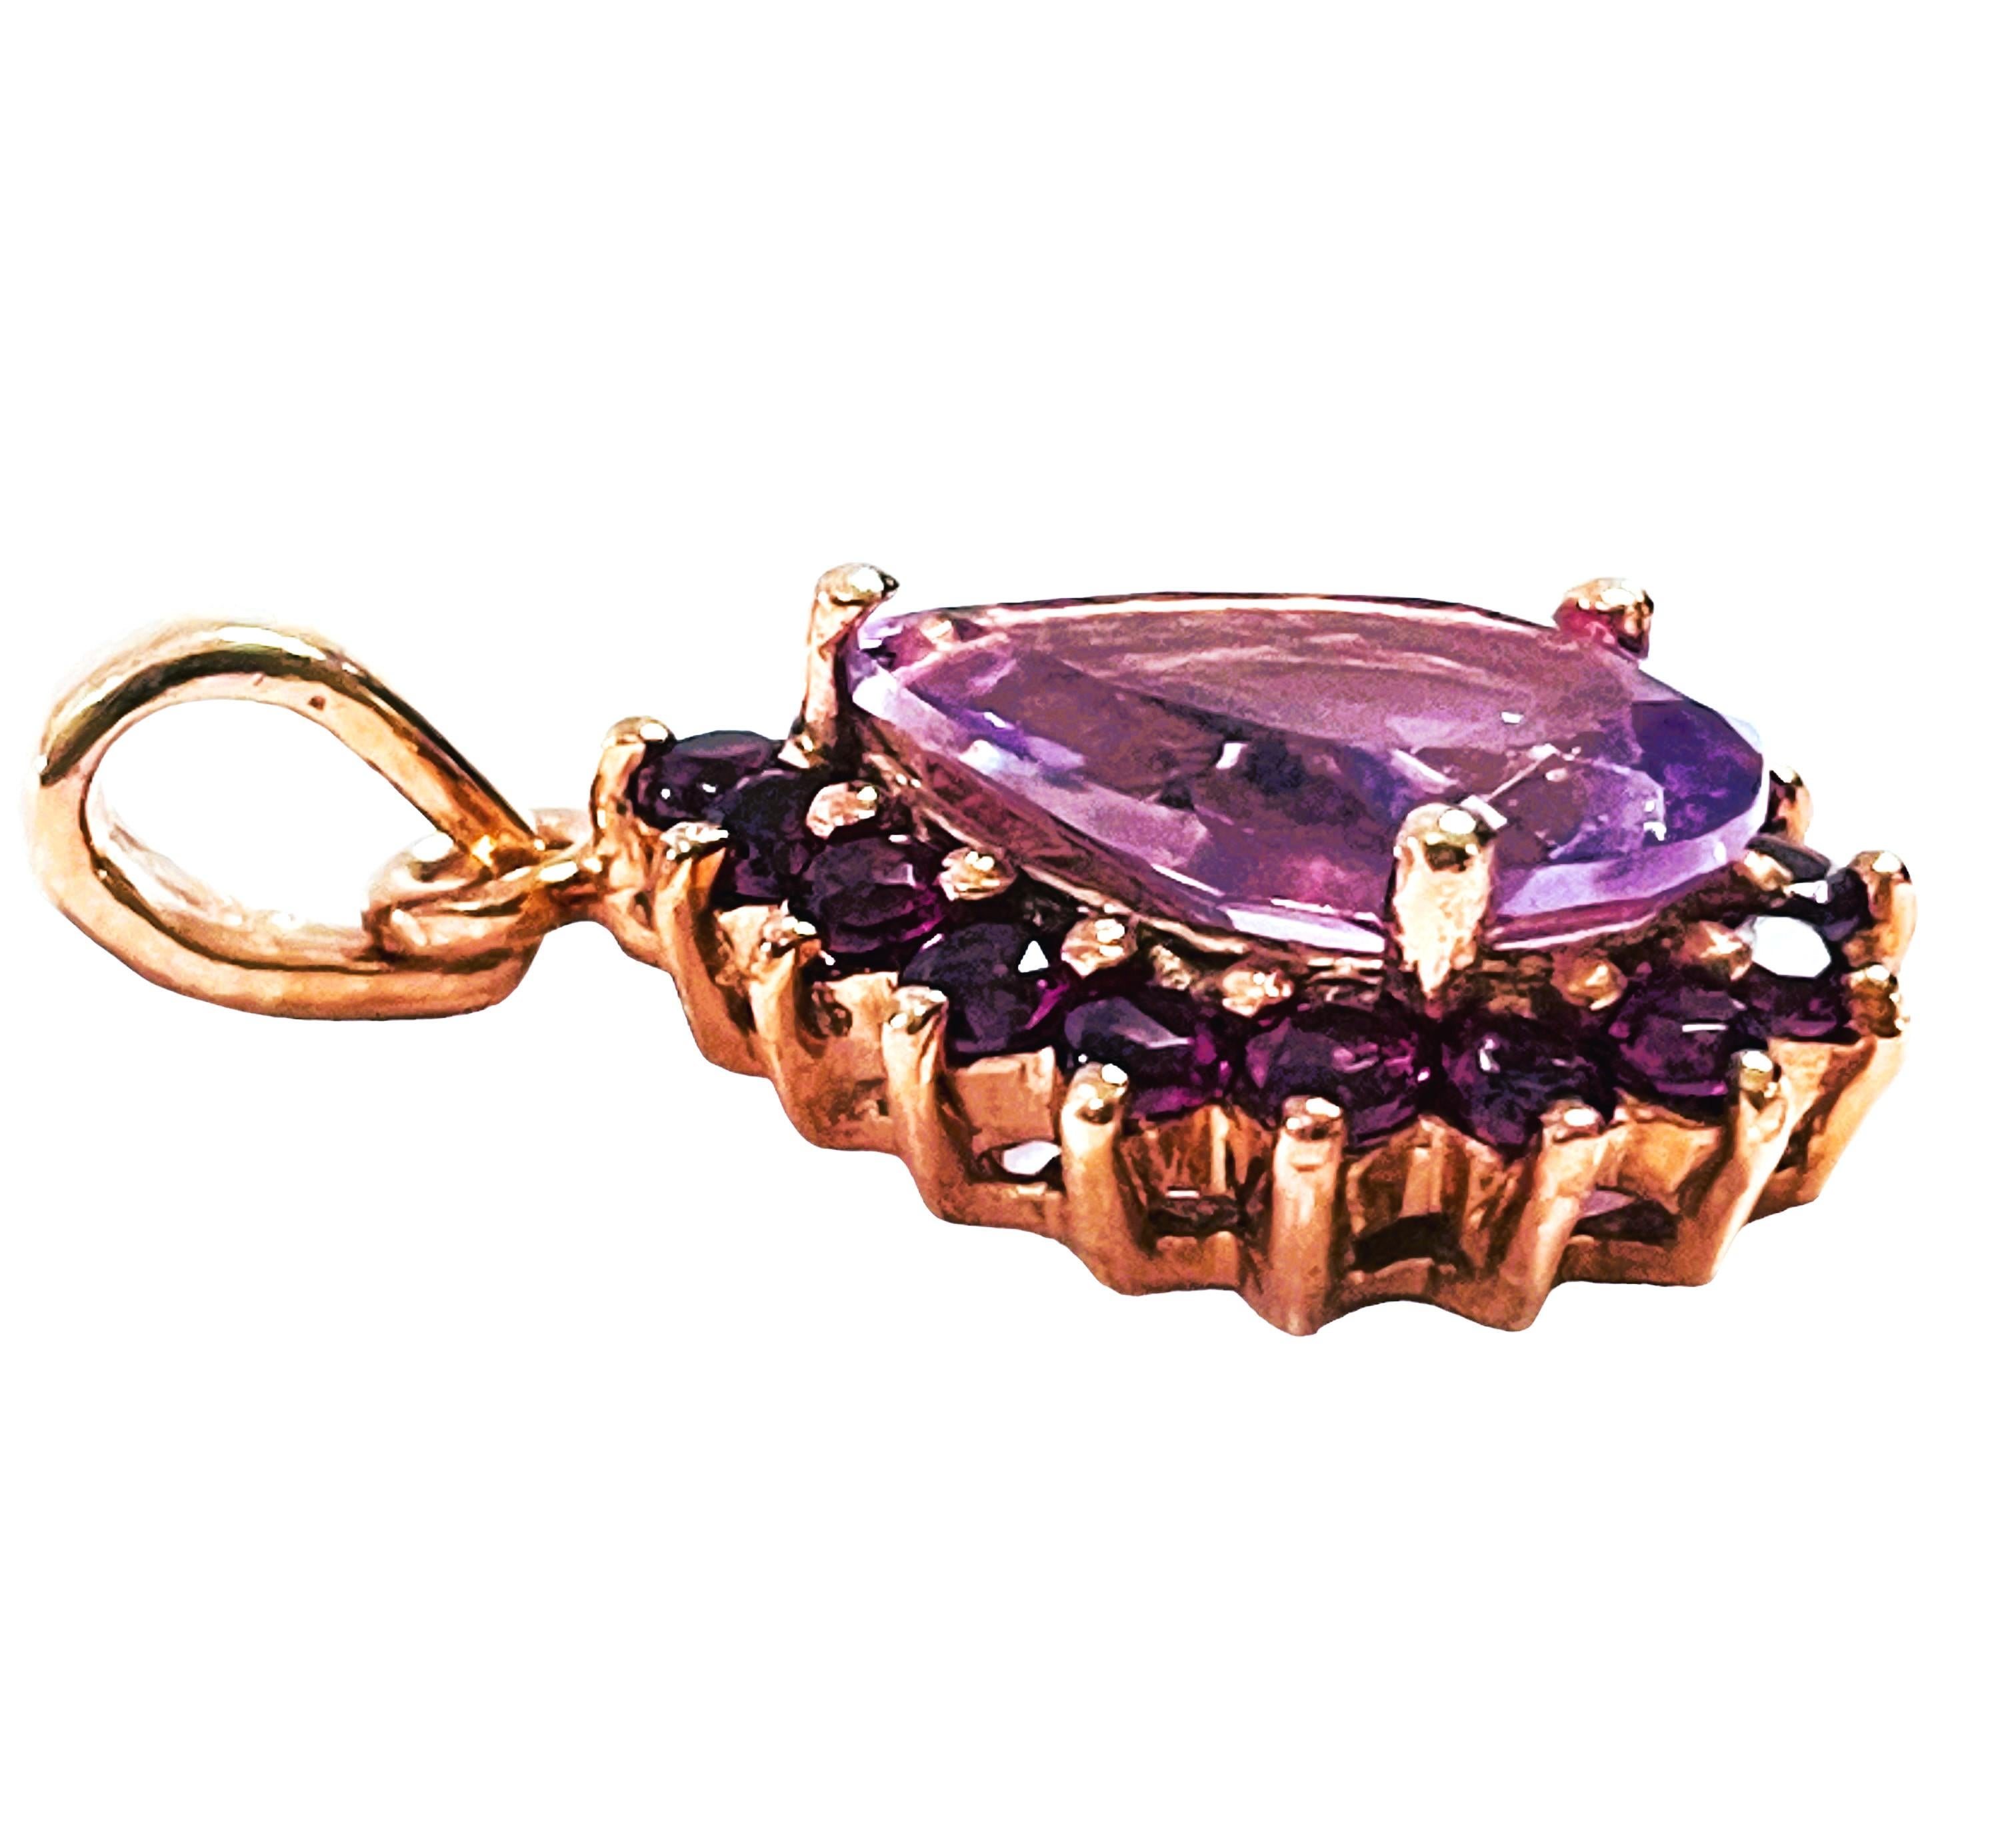 New 3.2 Carat Pink Amethyst and Rhodolite Garnet Sterling Silver Pendant In New Condition For Sale In Eagan, MN